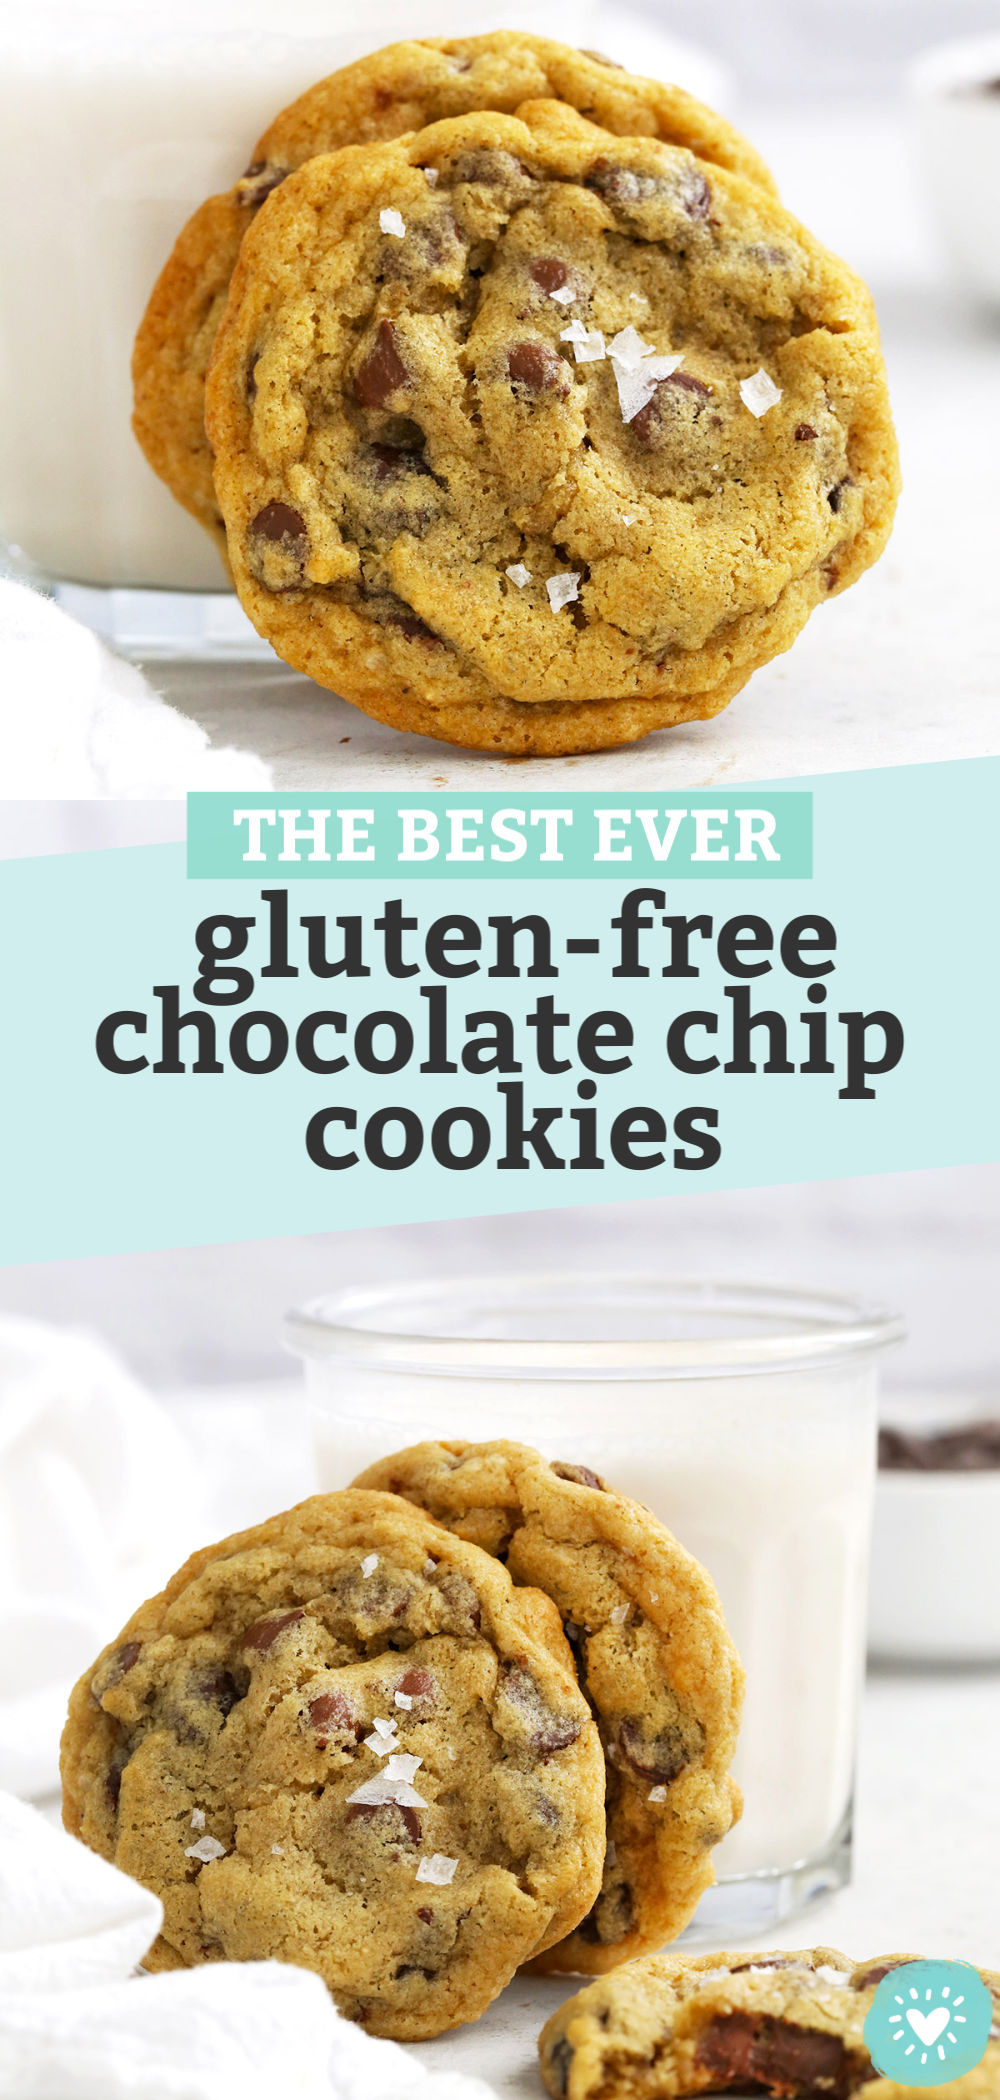 Collage of images of gluten free chocolate chip cookies with text overlay that reads "The Best Ever Gluten-Free Chocolate Chip Cookies"